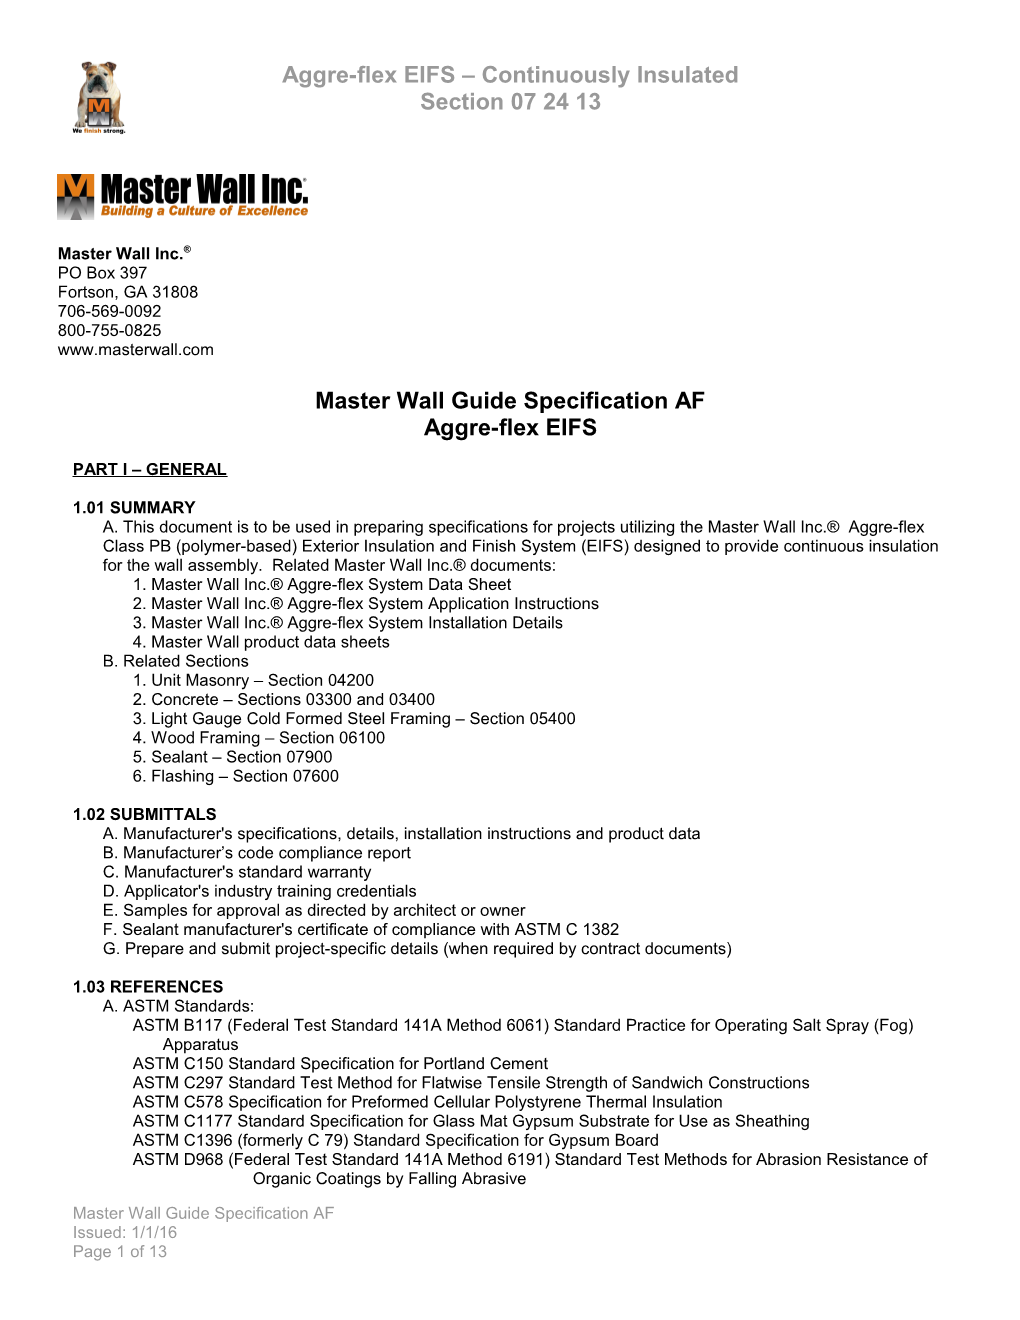 Master Wall Guide Specification AF